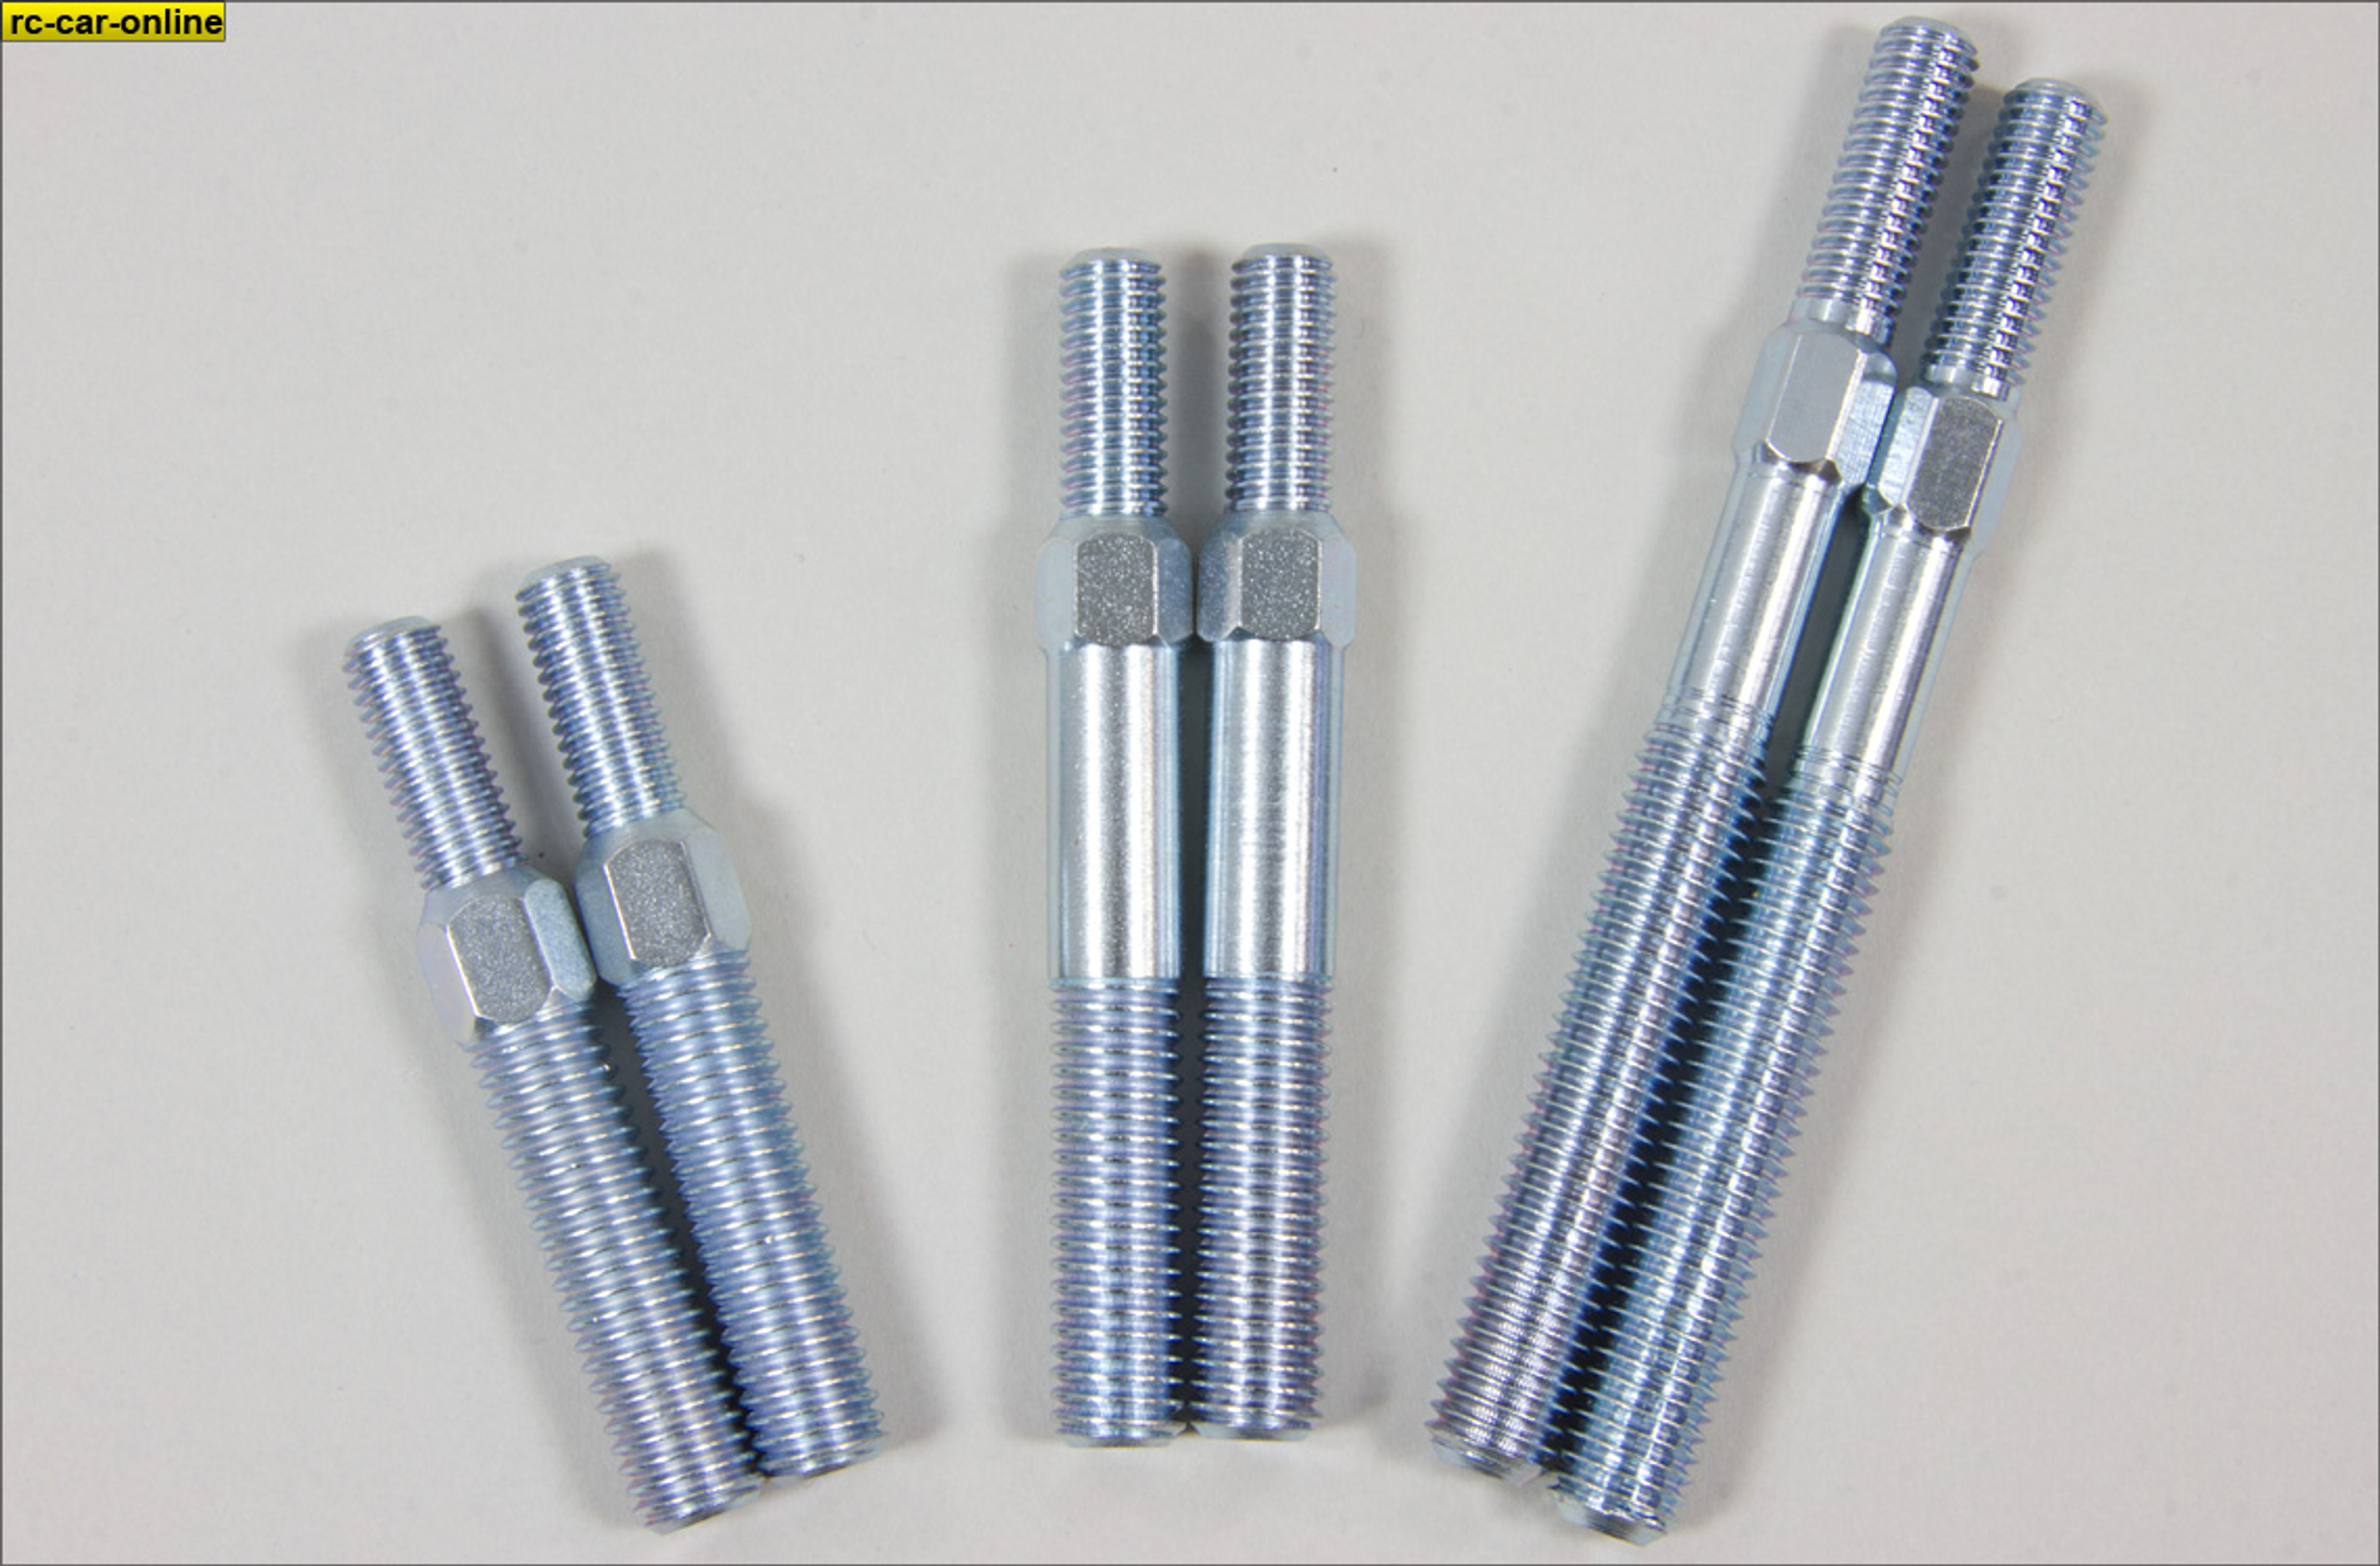 y0782/01 Electrogalvanized M8/M10 steel turnbuckles - all lengths, 2 pcs.